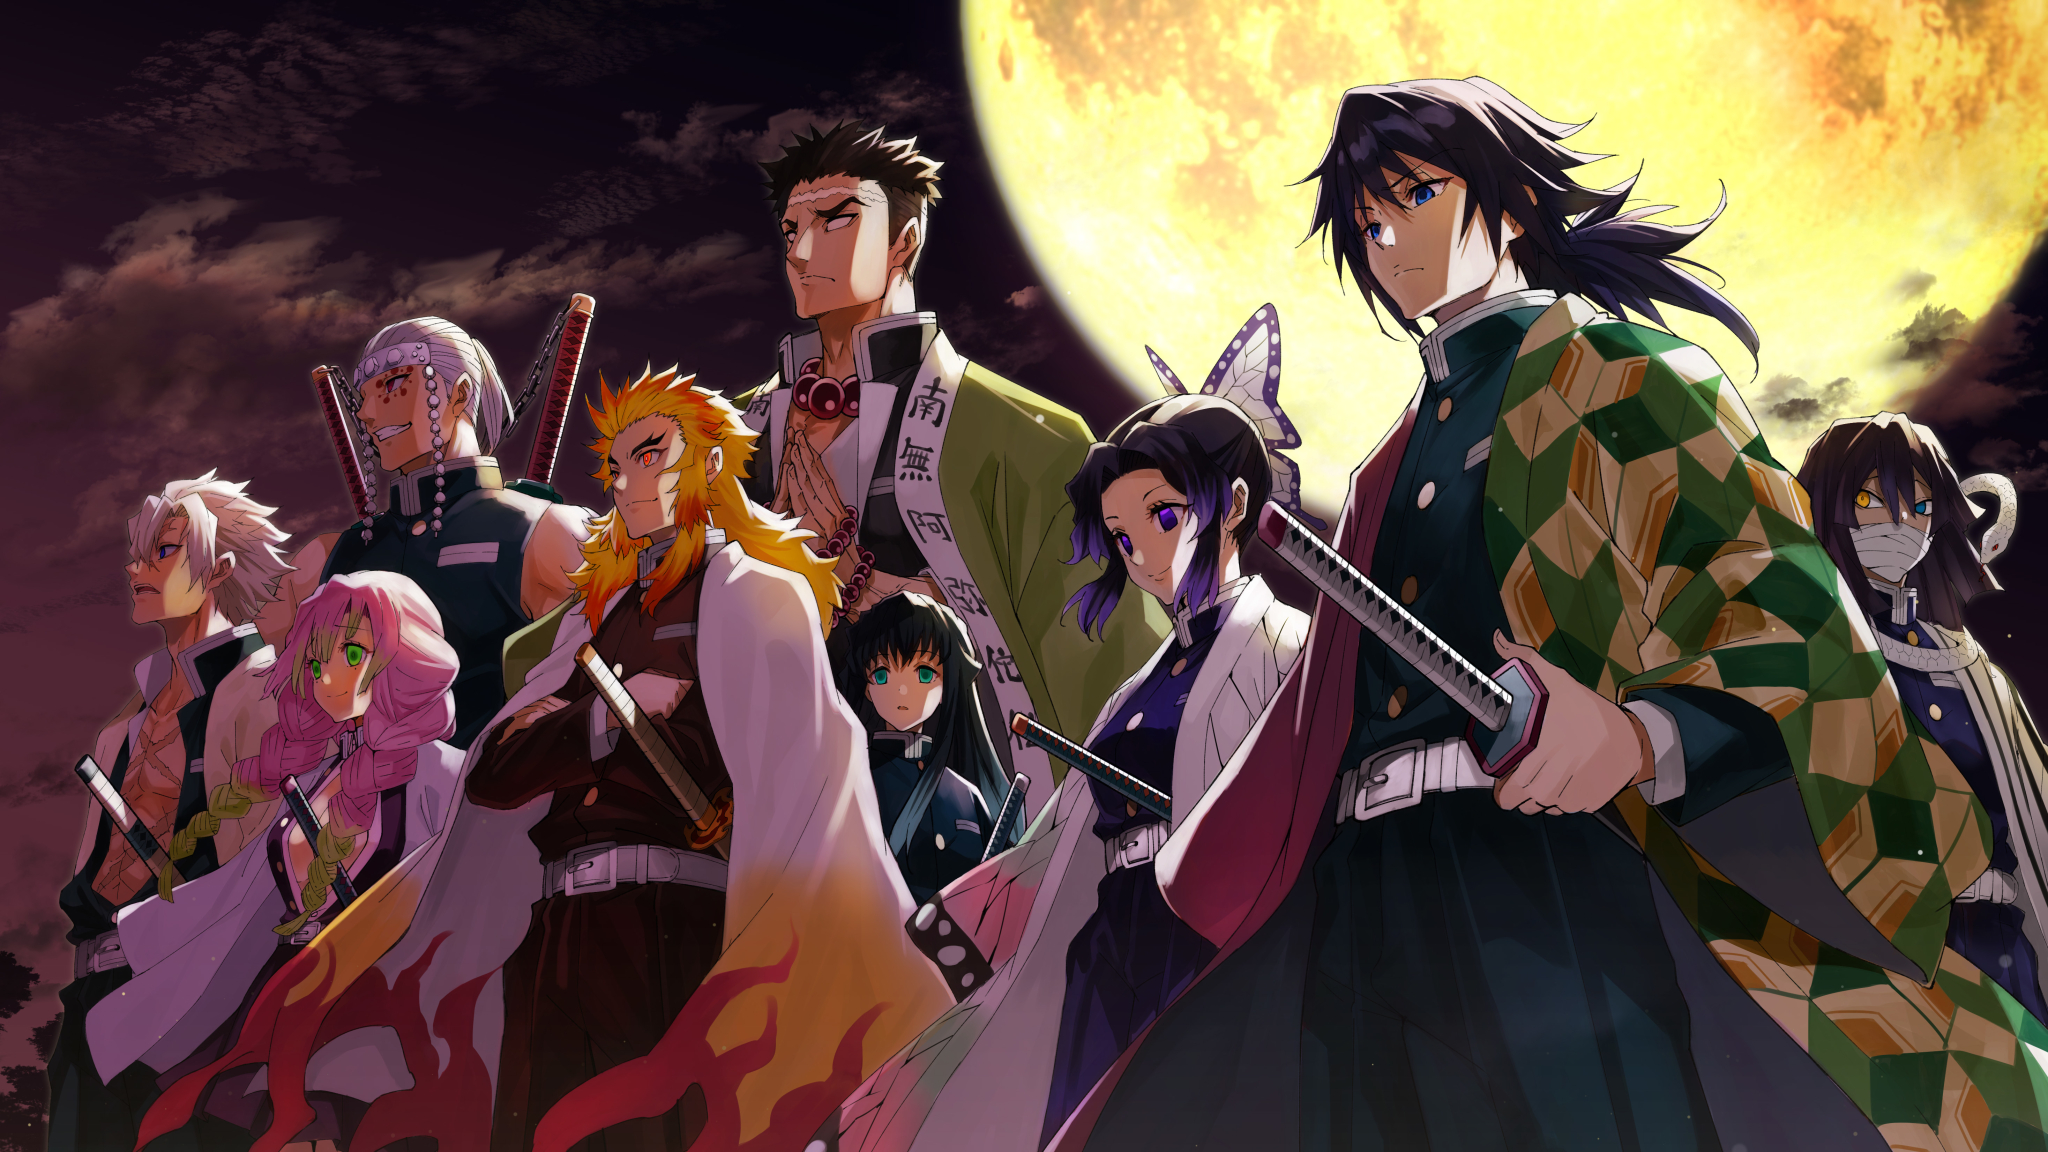 48x1152 Demon Slayer Kimetsu No Yaiba 4k Characters 48x1152 Resolution Wallpaper Hd Anime 4k Wallpapers Images Photos And Background Wallpapers Den